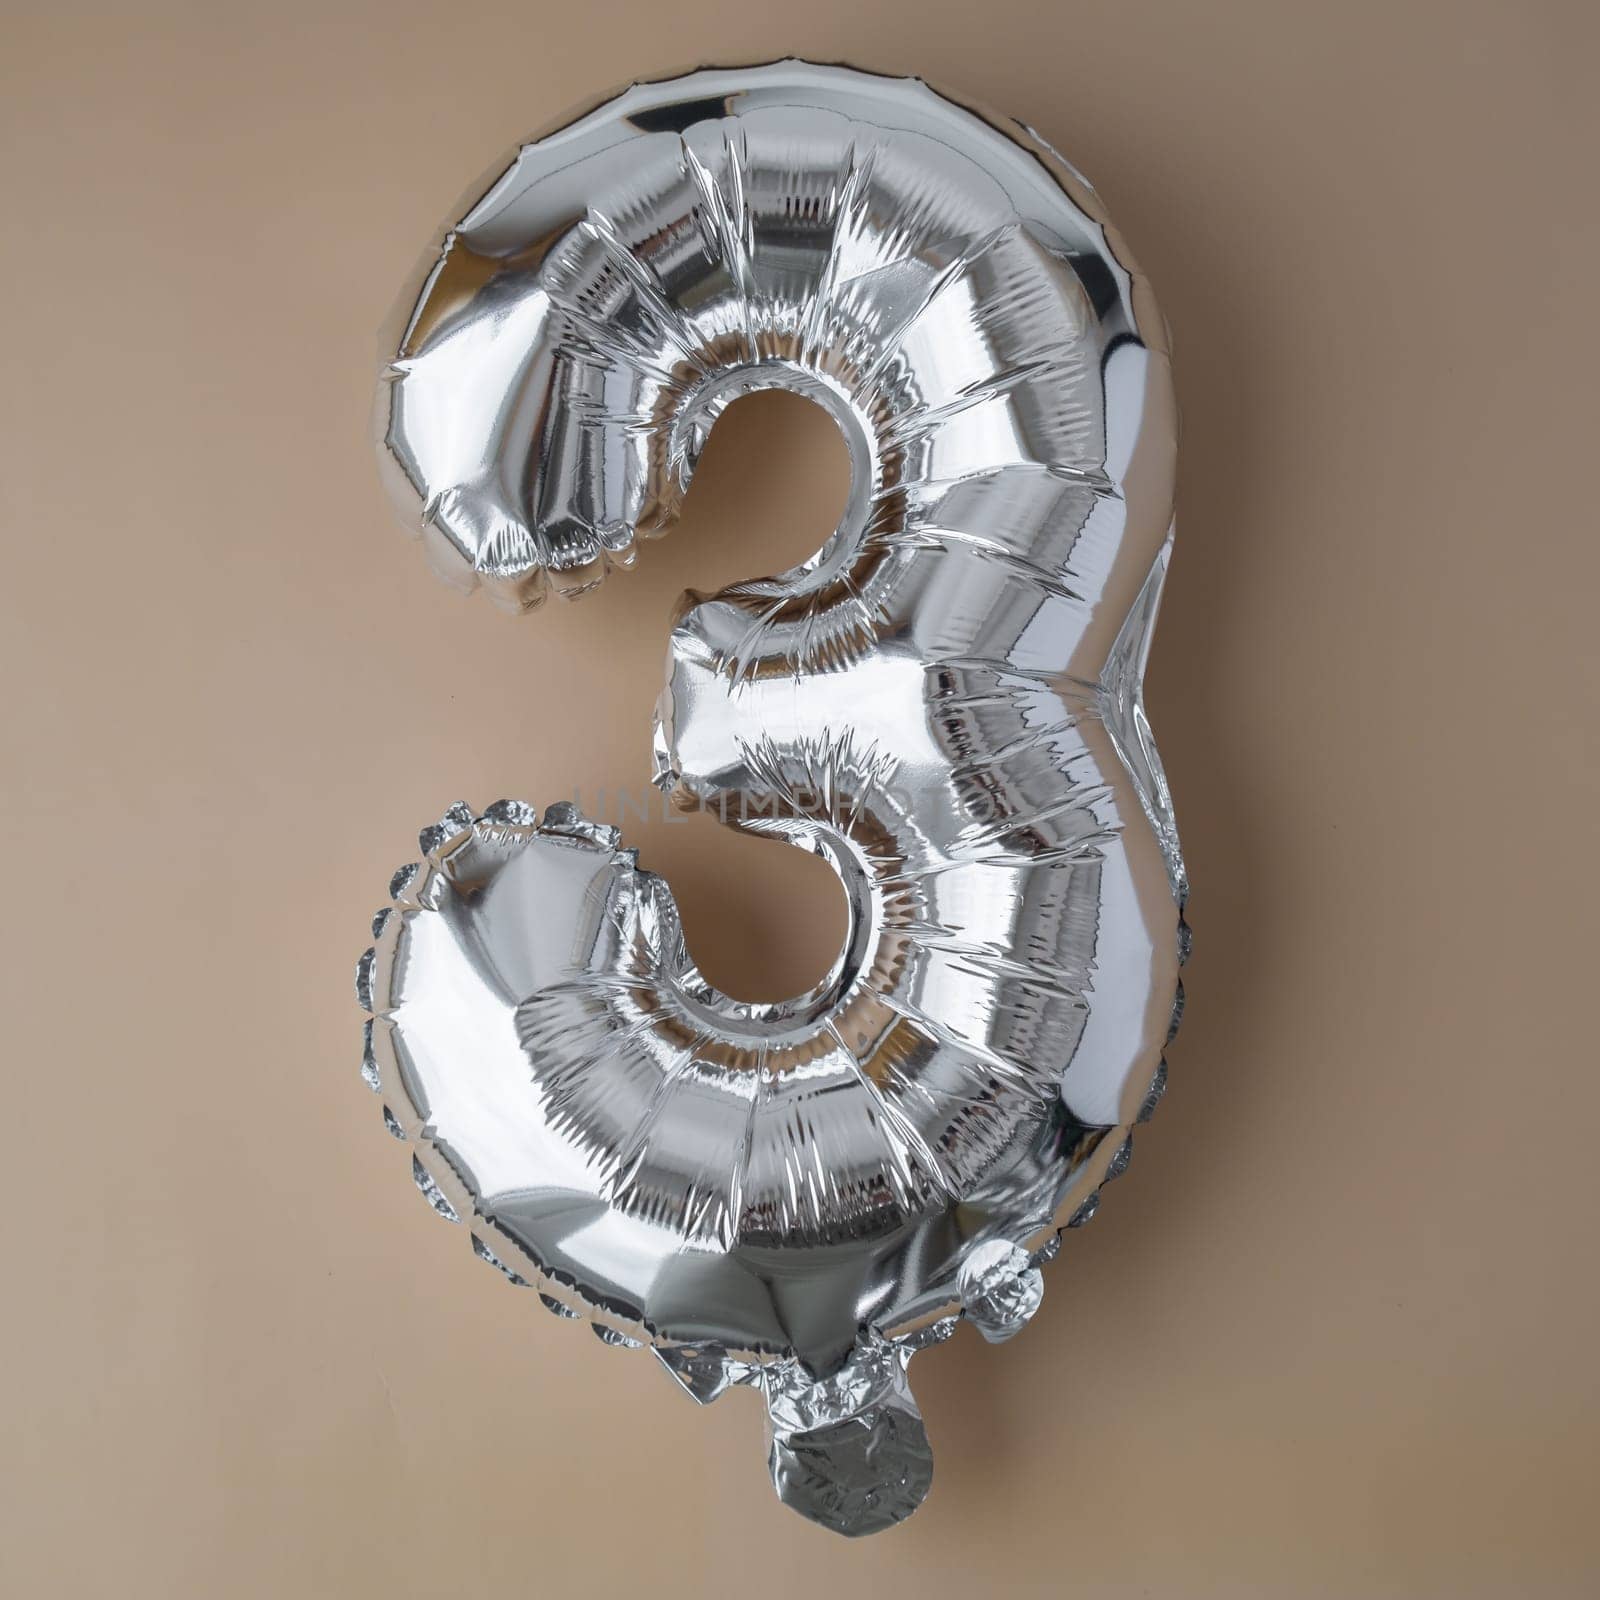 3 three metallic balloon on beige neutral background. Greeting card silver foil balloon number Happy birthday holiday concept. Copy space for text. Celebration party congratulation decoration